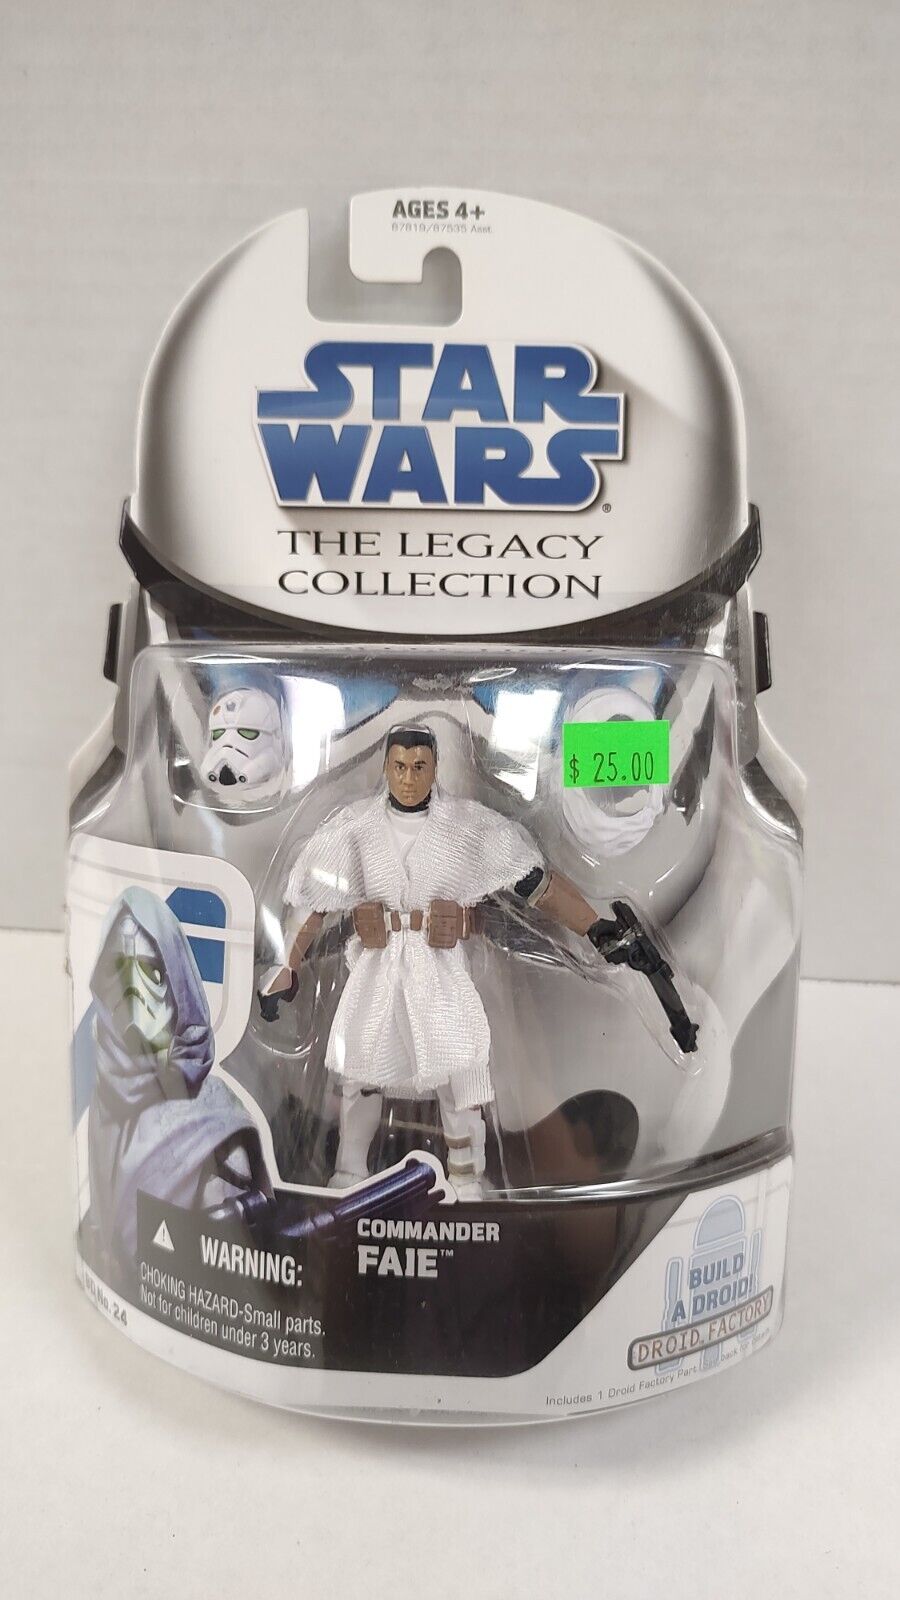 Star Wars The Legacy Collection Commander Faie No. 24